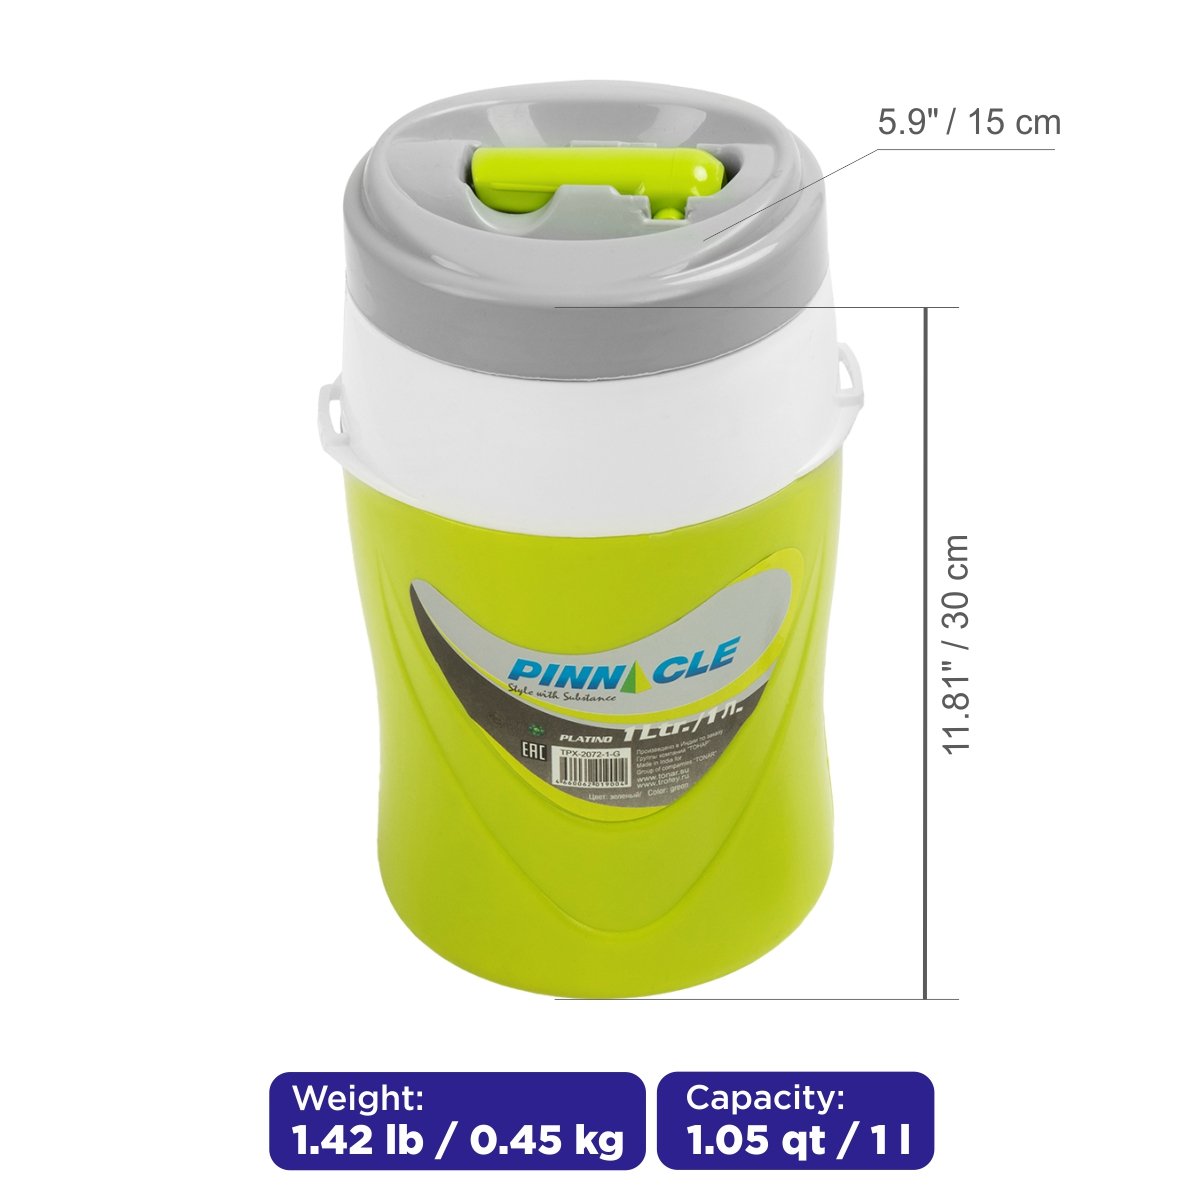 Proxon Portable Beverage Cooler Jug for Outdoors and School, 1 qt weighs 1 lb and is 11.8 inches high and 6 inches wide.